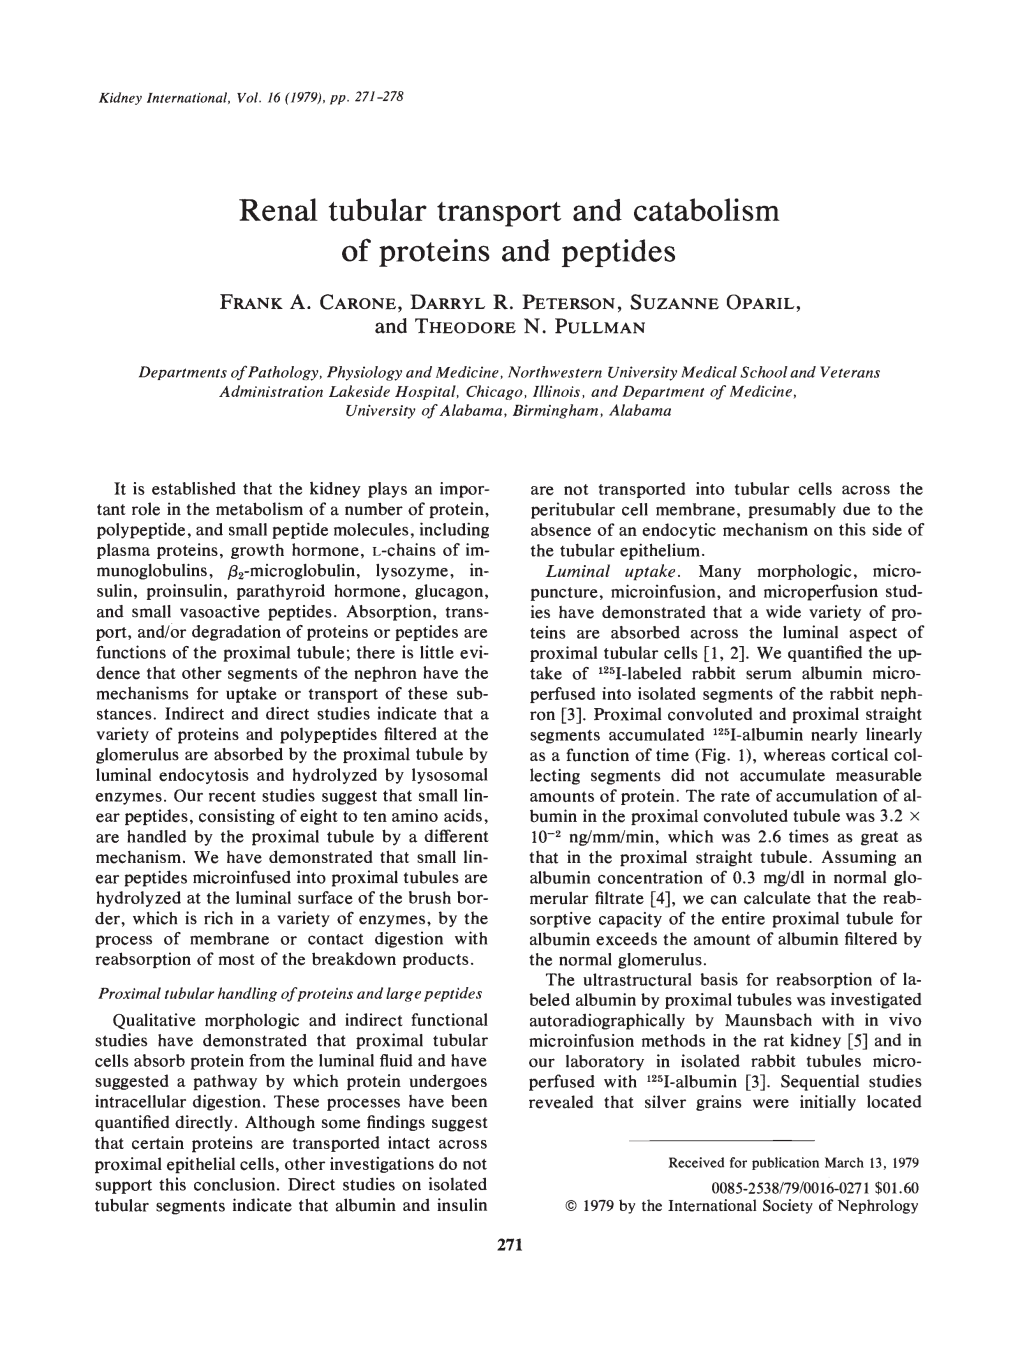 Renal Tubular Transport and Catabolism of Proteins and Peptides